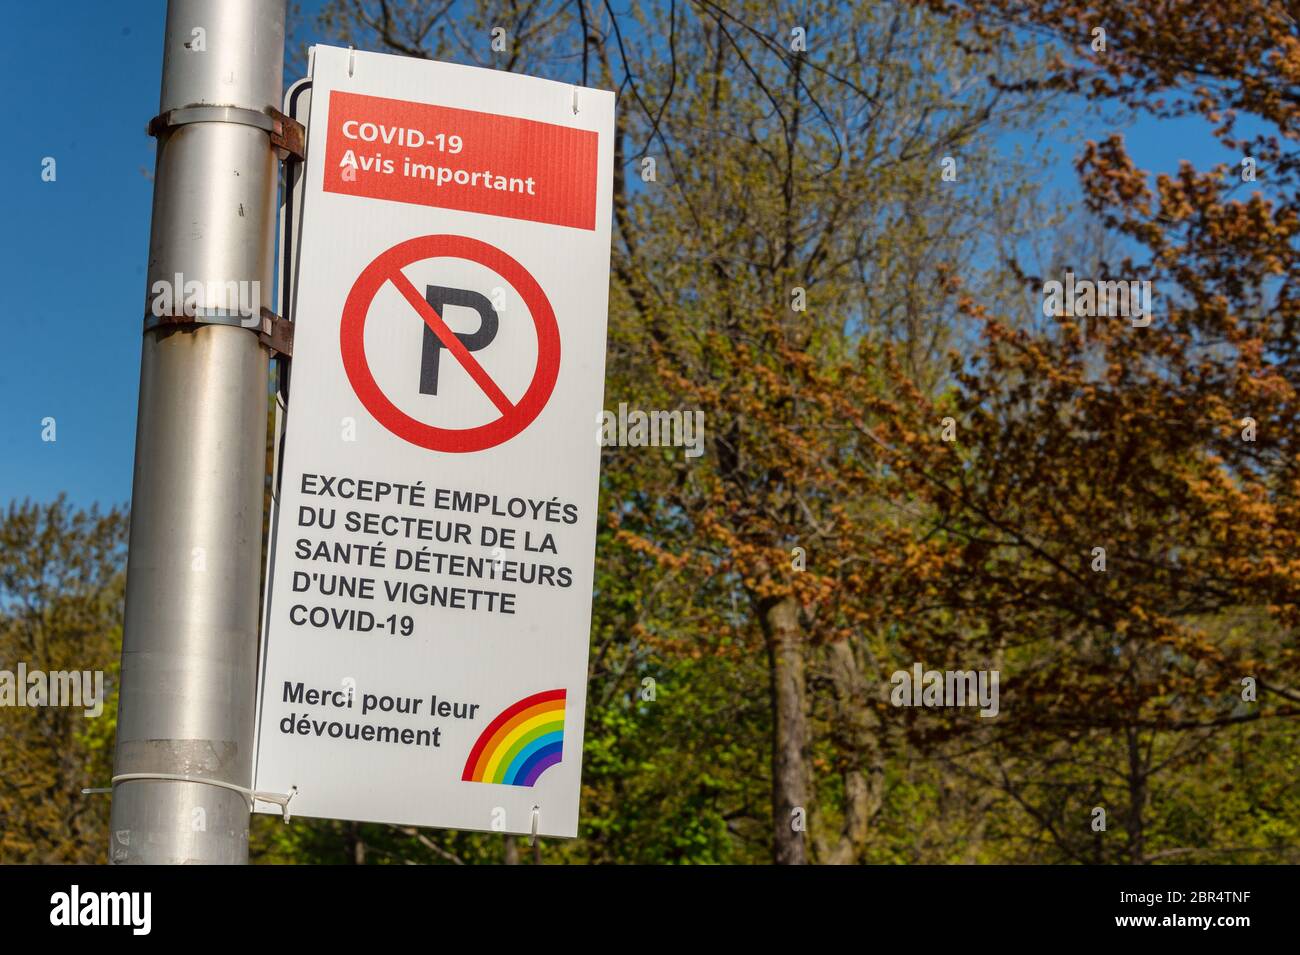 Montreal, CA - 20 May 2020: Reserved parking for Covid-19 care givers Stock Photo